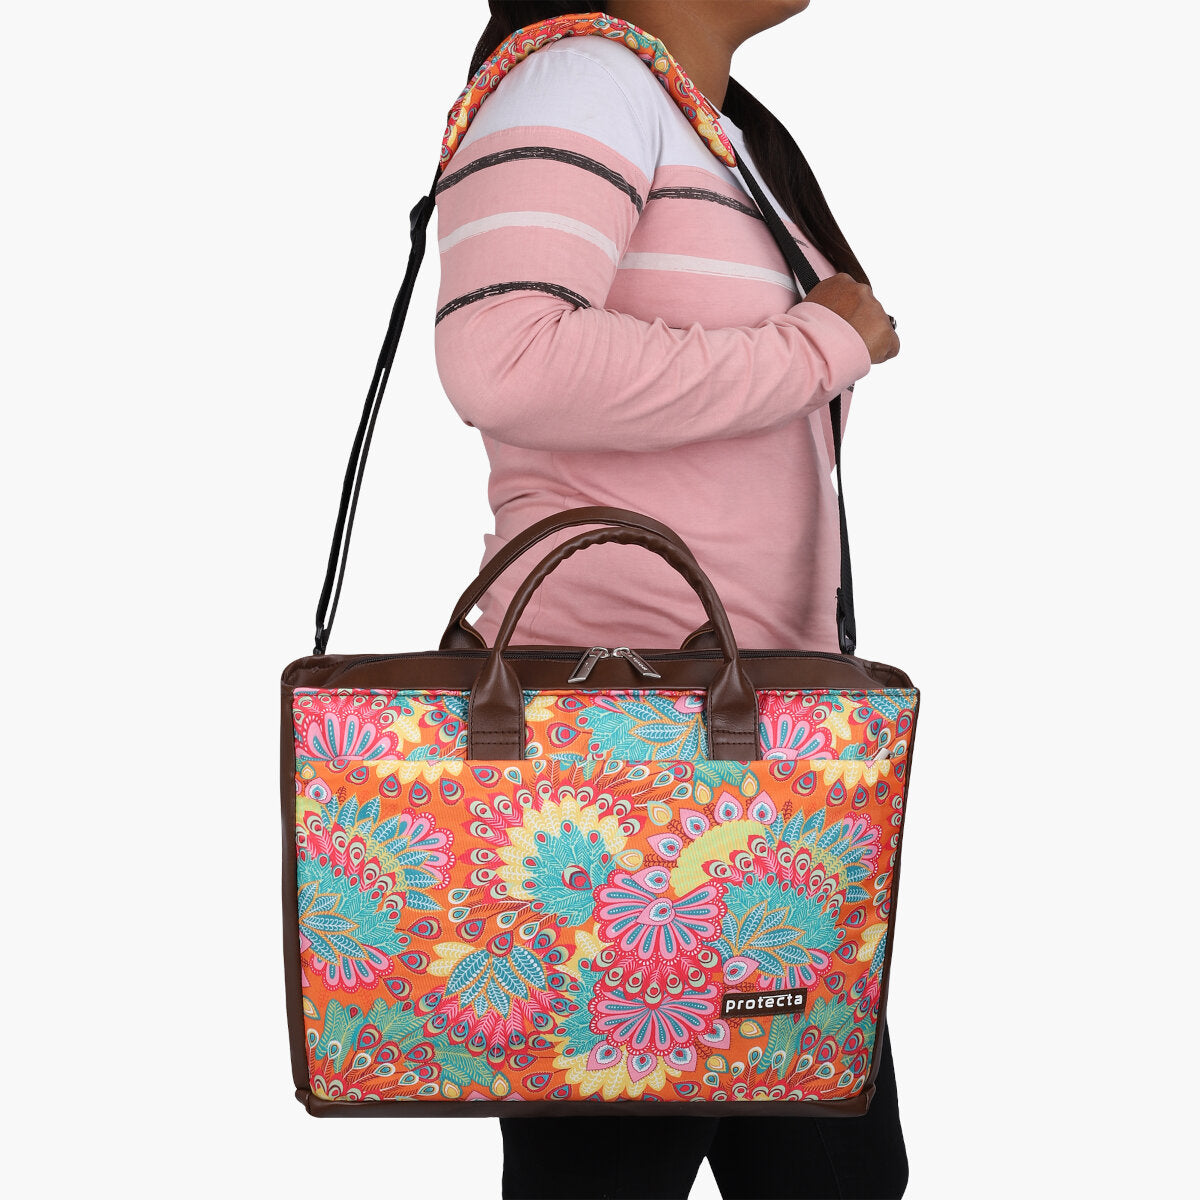 Paisley Print | Protecta Evenly Poised Office Laptop Bag for Women - 7